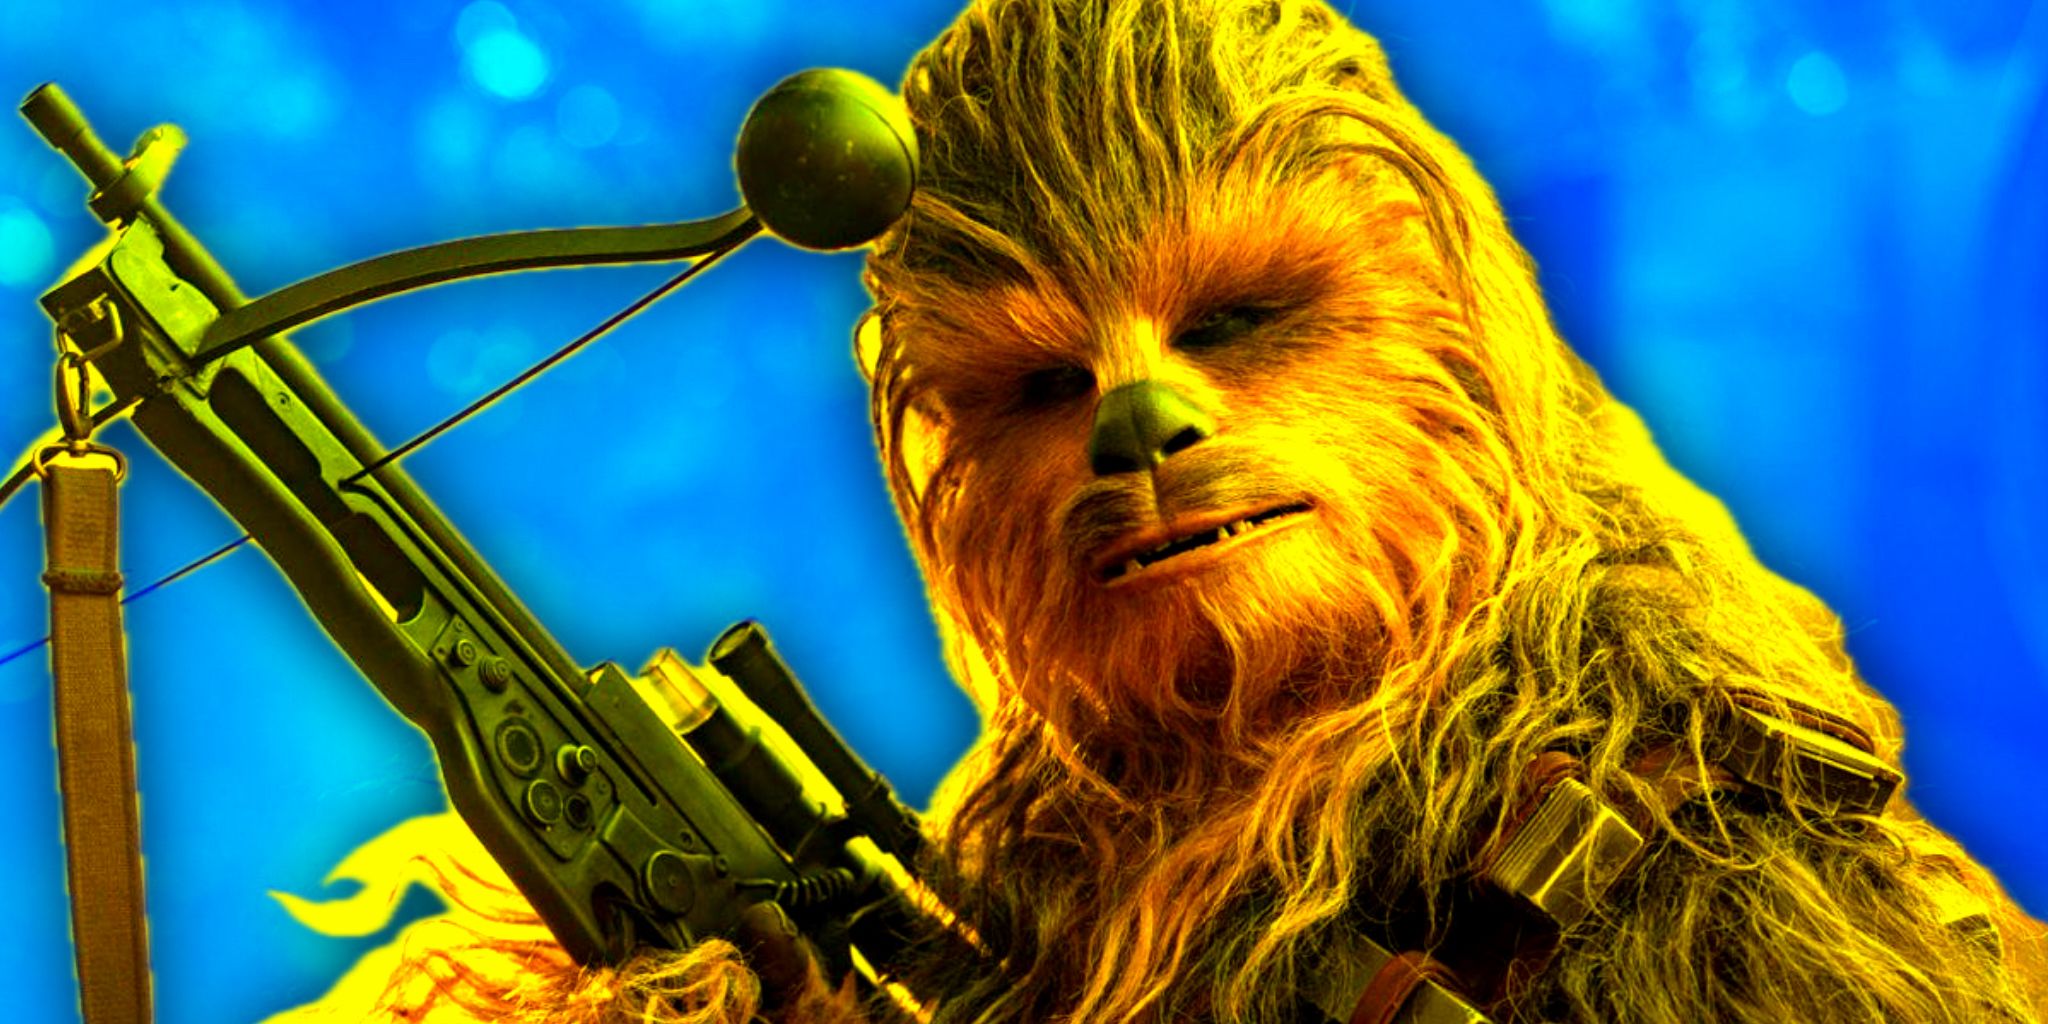 Chewbacca poses with his bowcaster in Star Wars